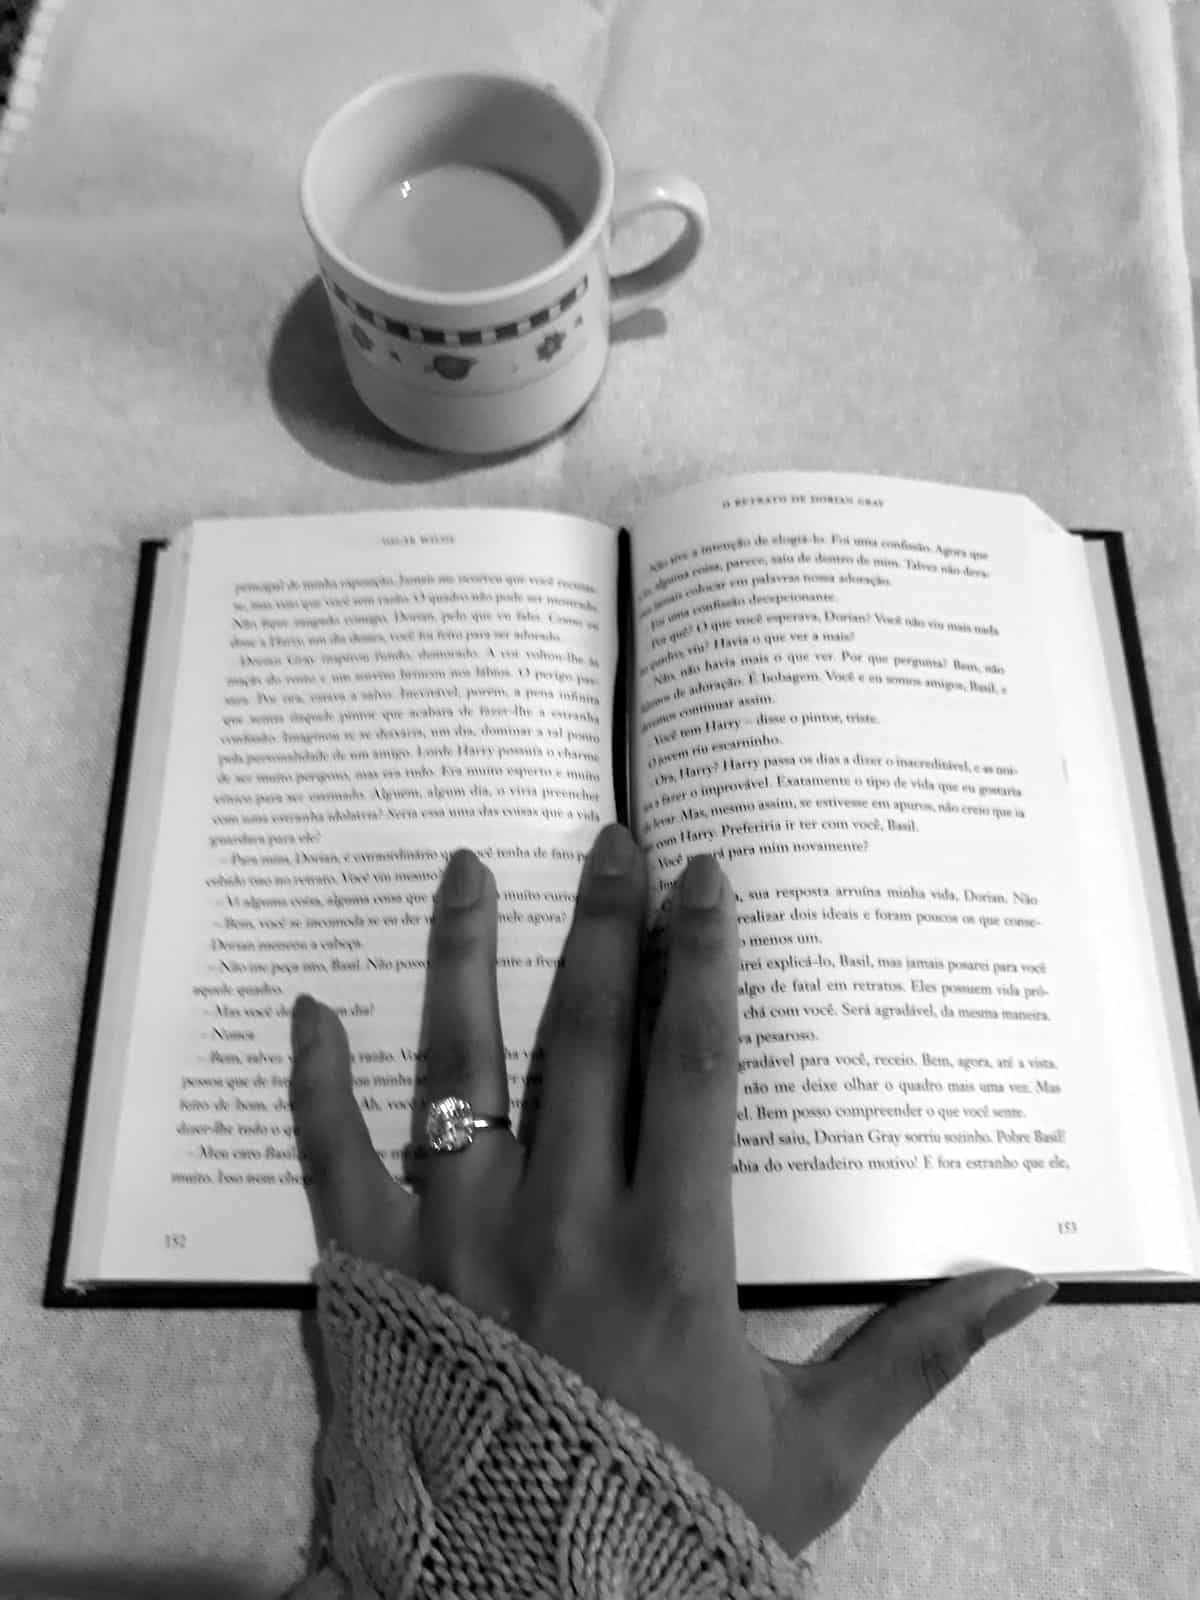 A black and white photo of a woman’s hand resting on an open book.